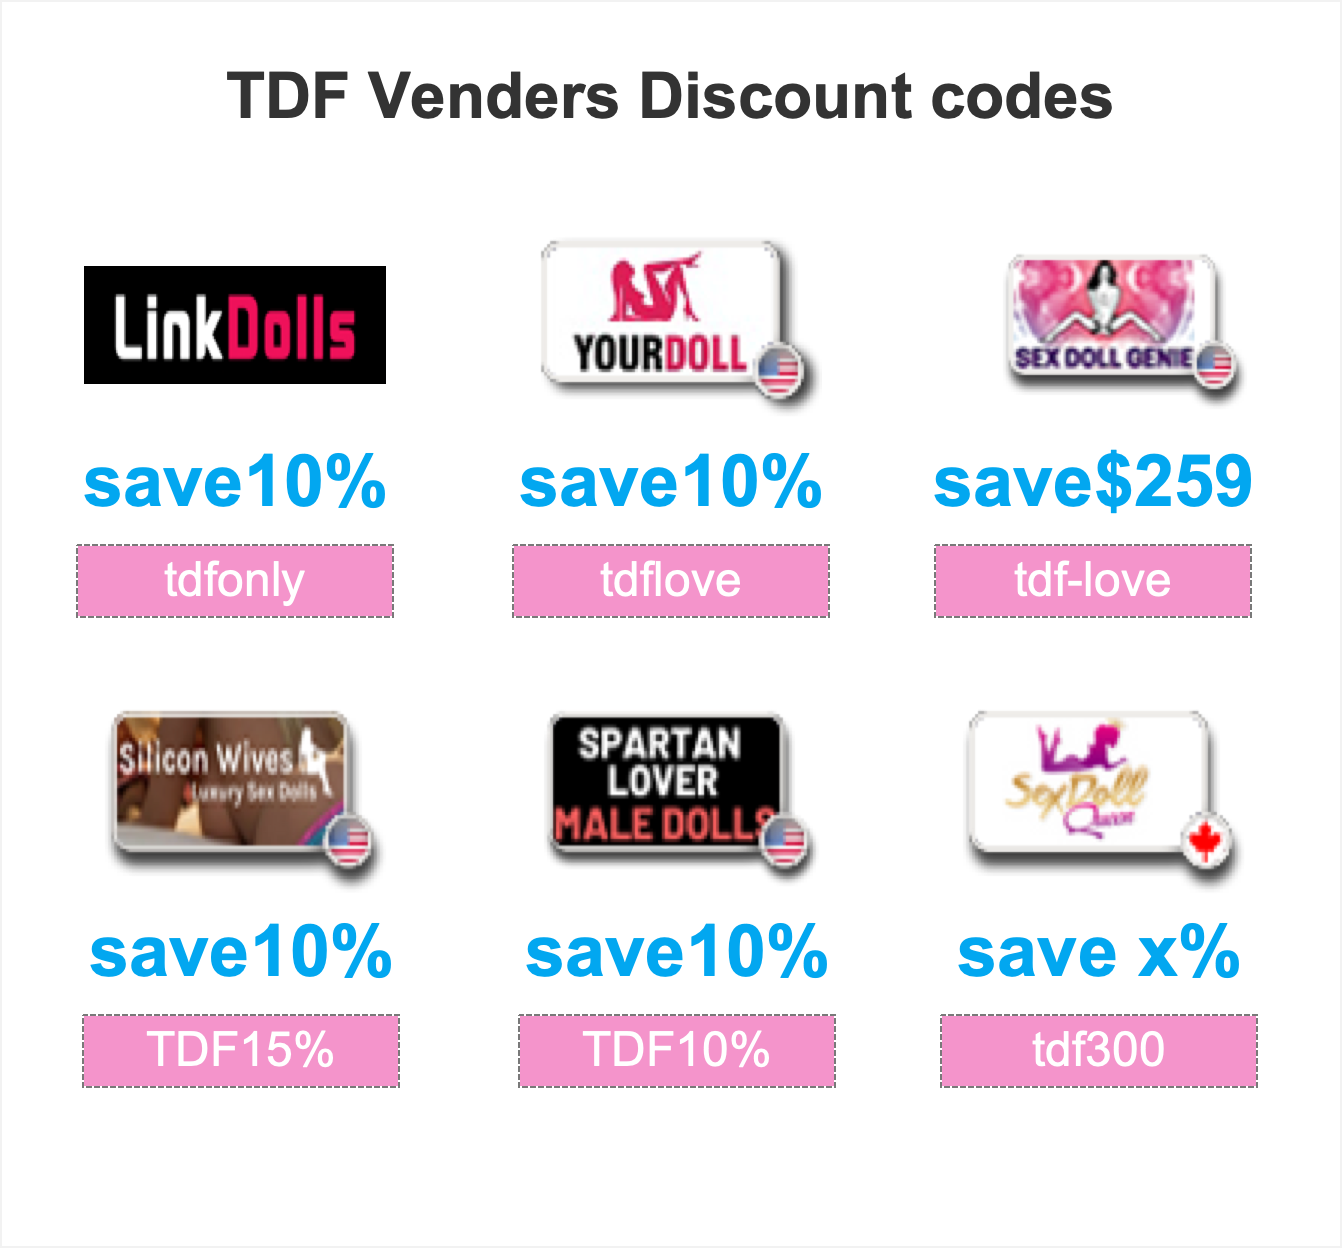 TDF Venders Discount codes Summary (updating)